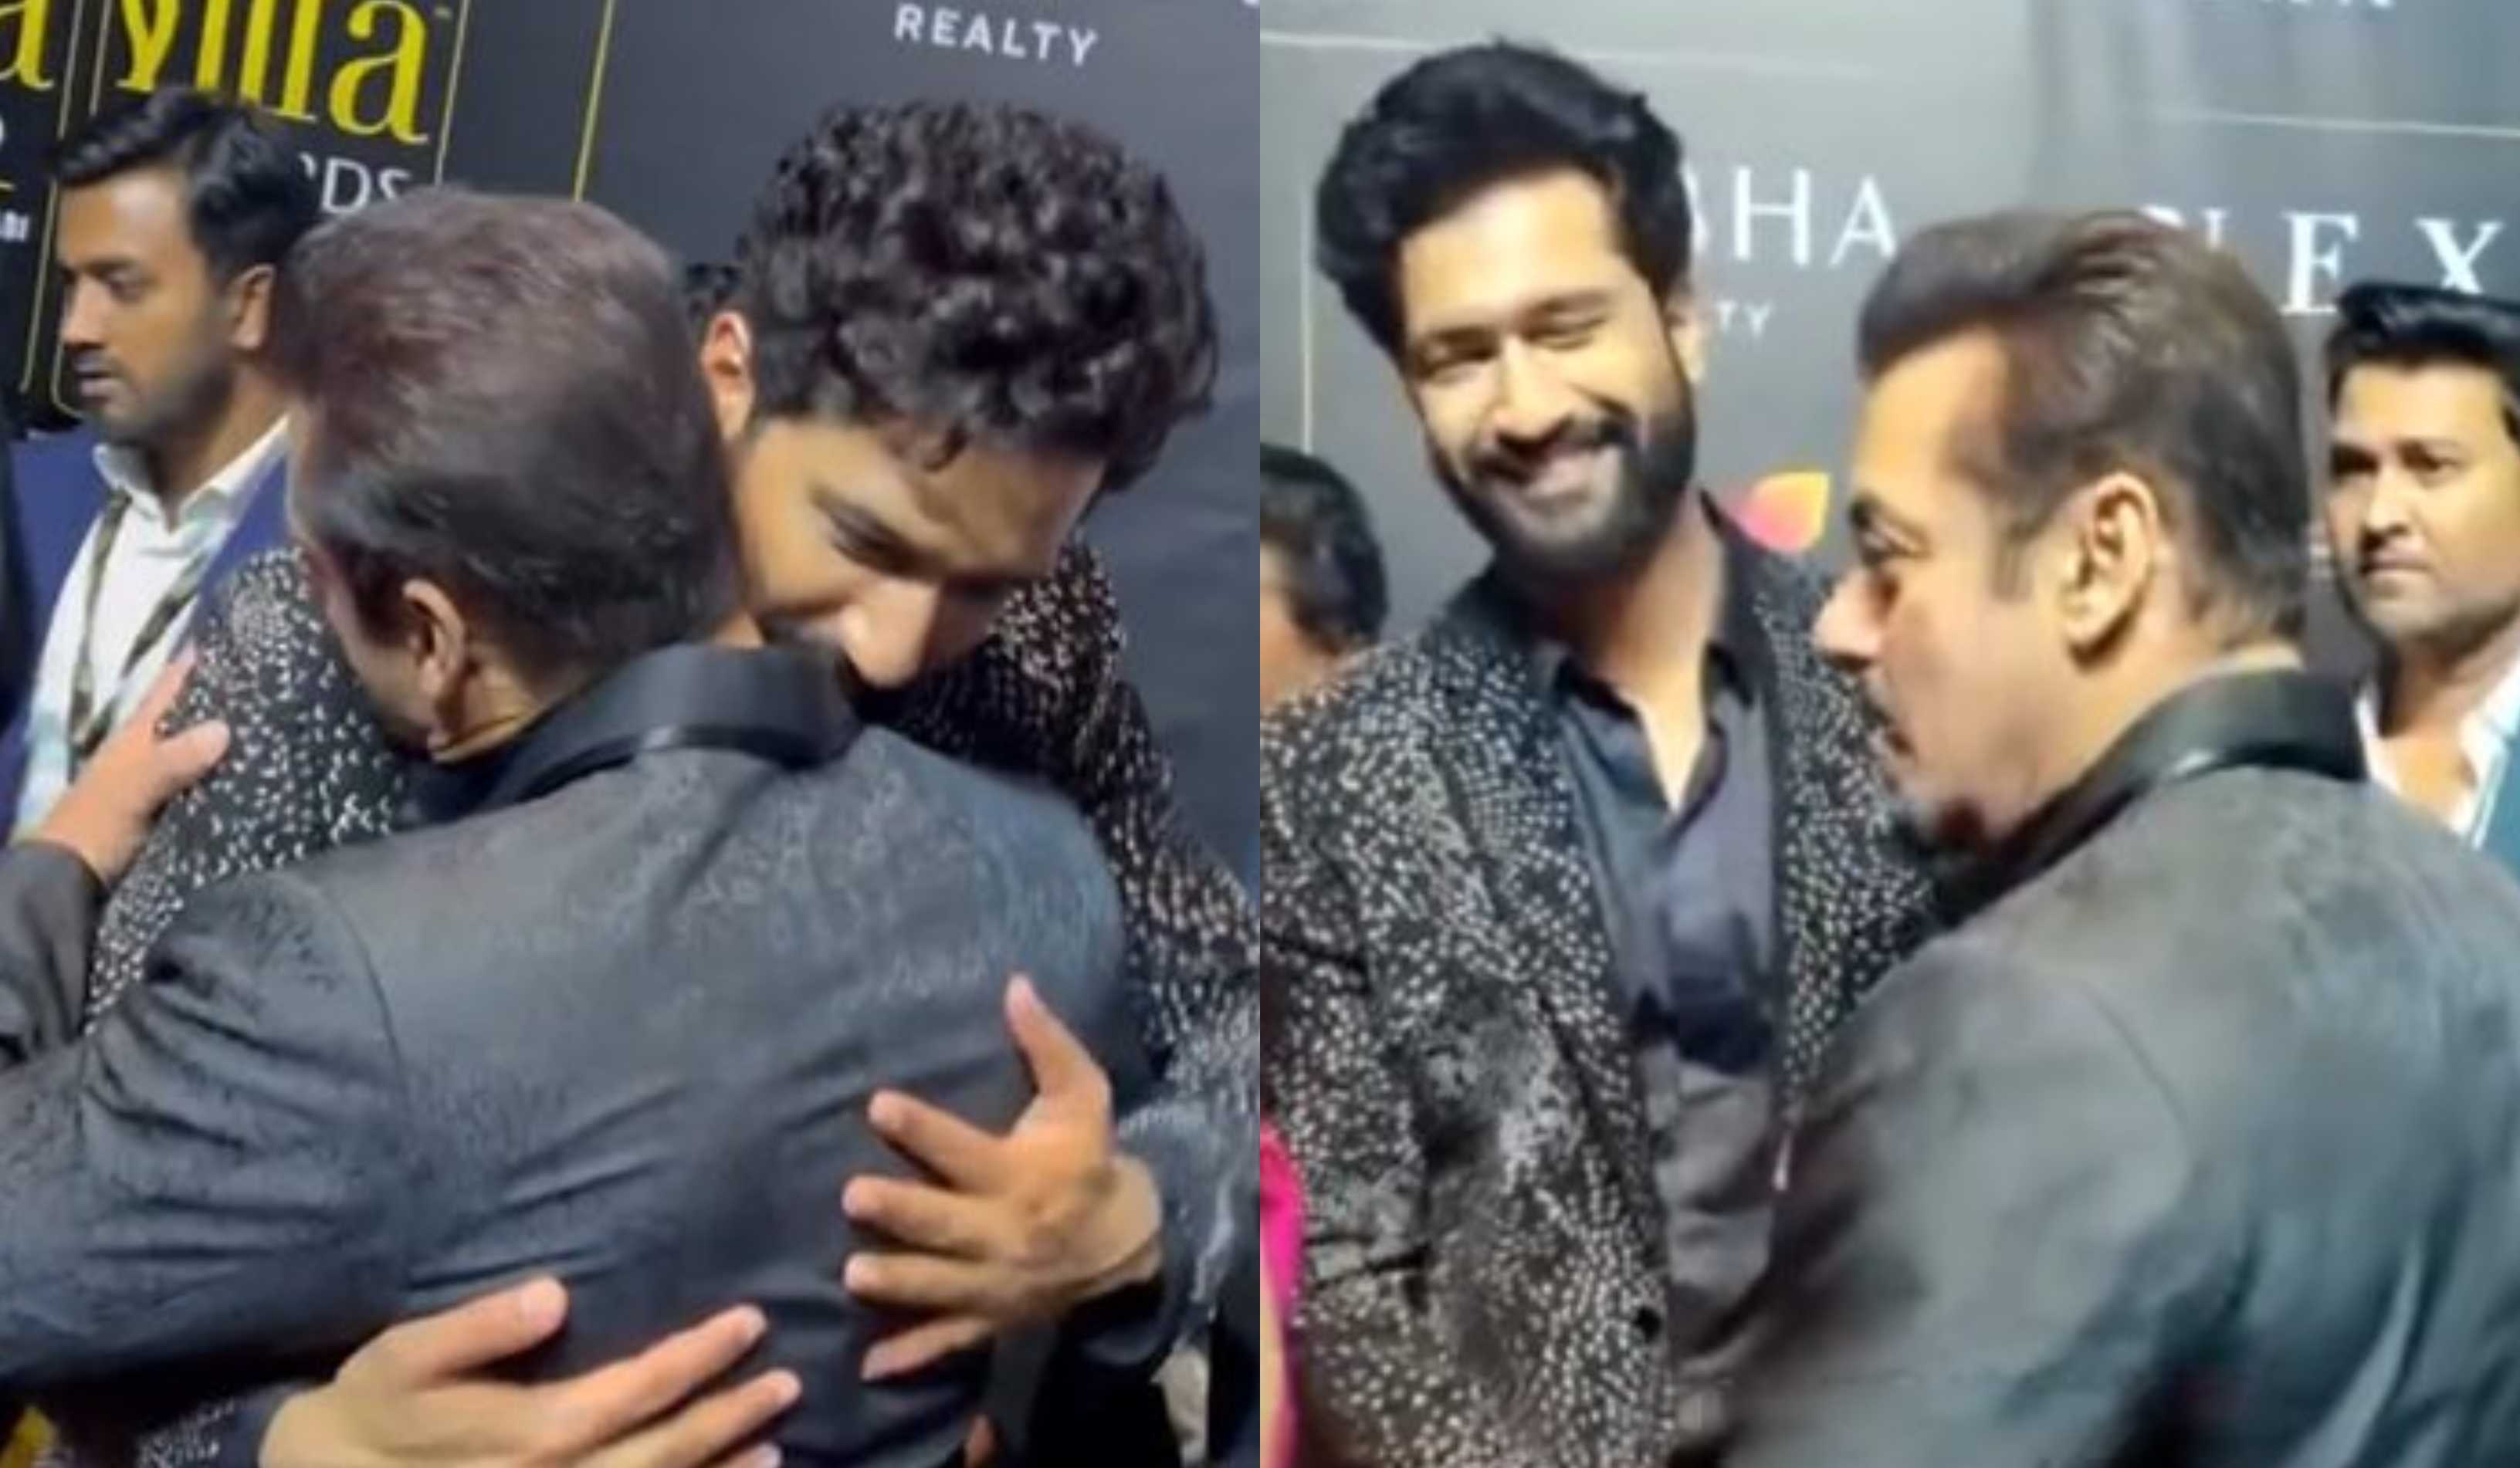 Salman Khan wanted to meet Vicky Kaushal after alleged cold shoulder video went viral? Here’s what we know